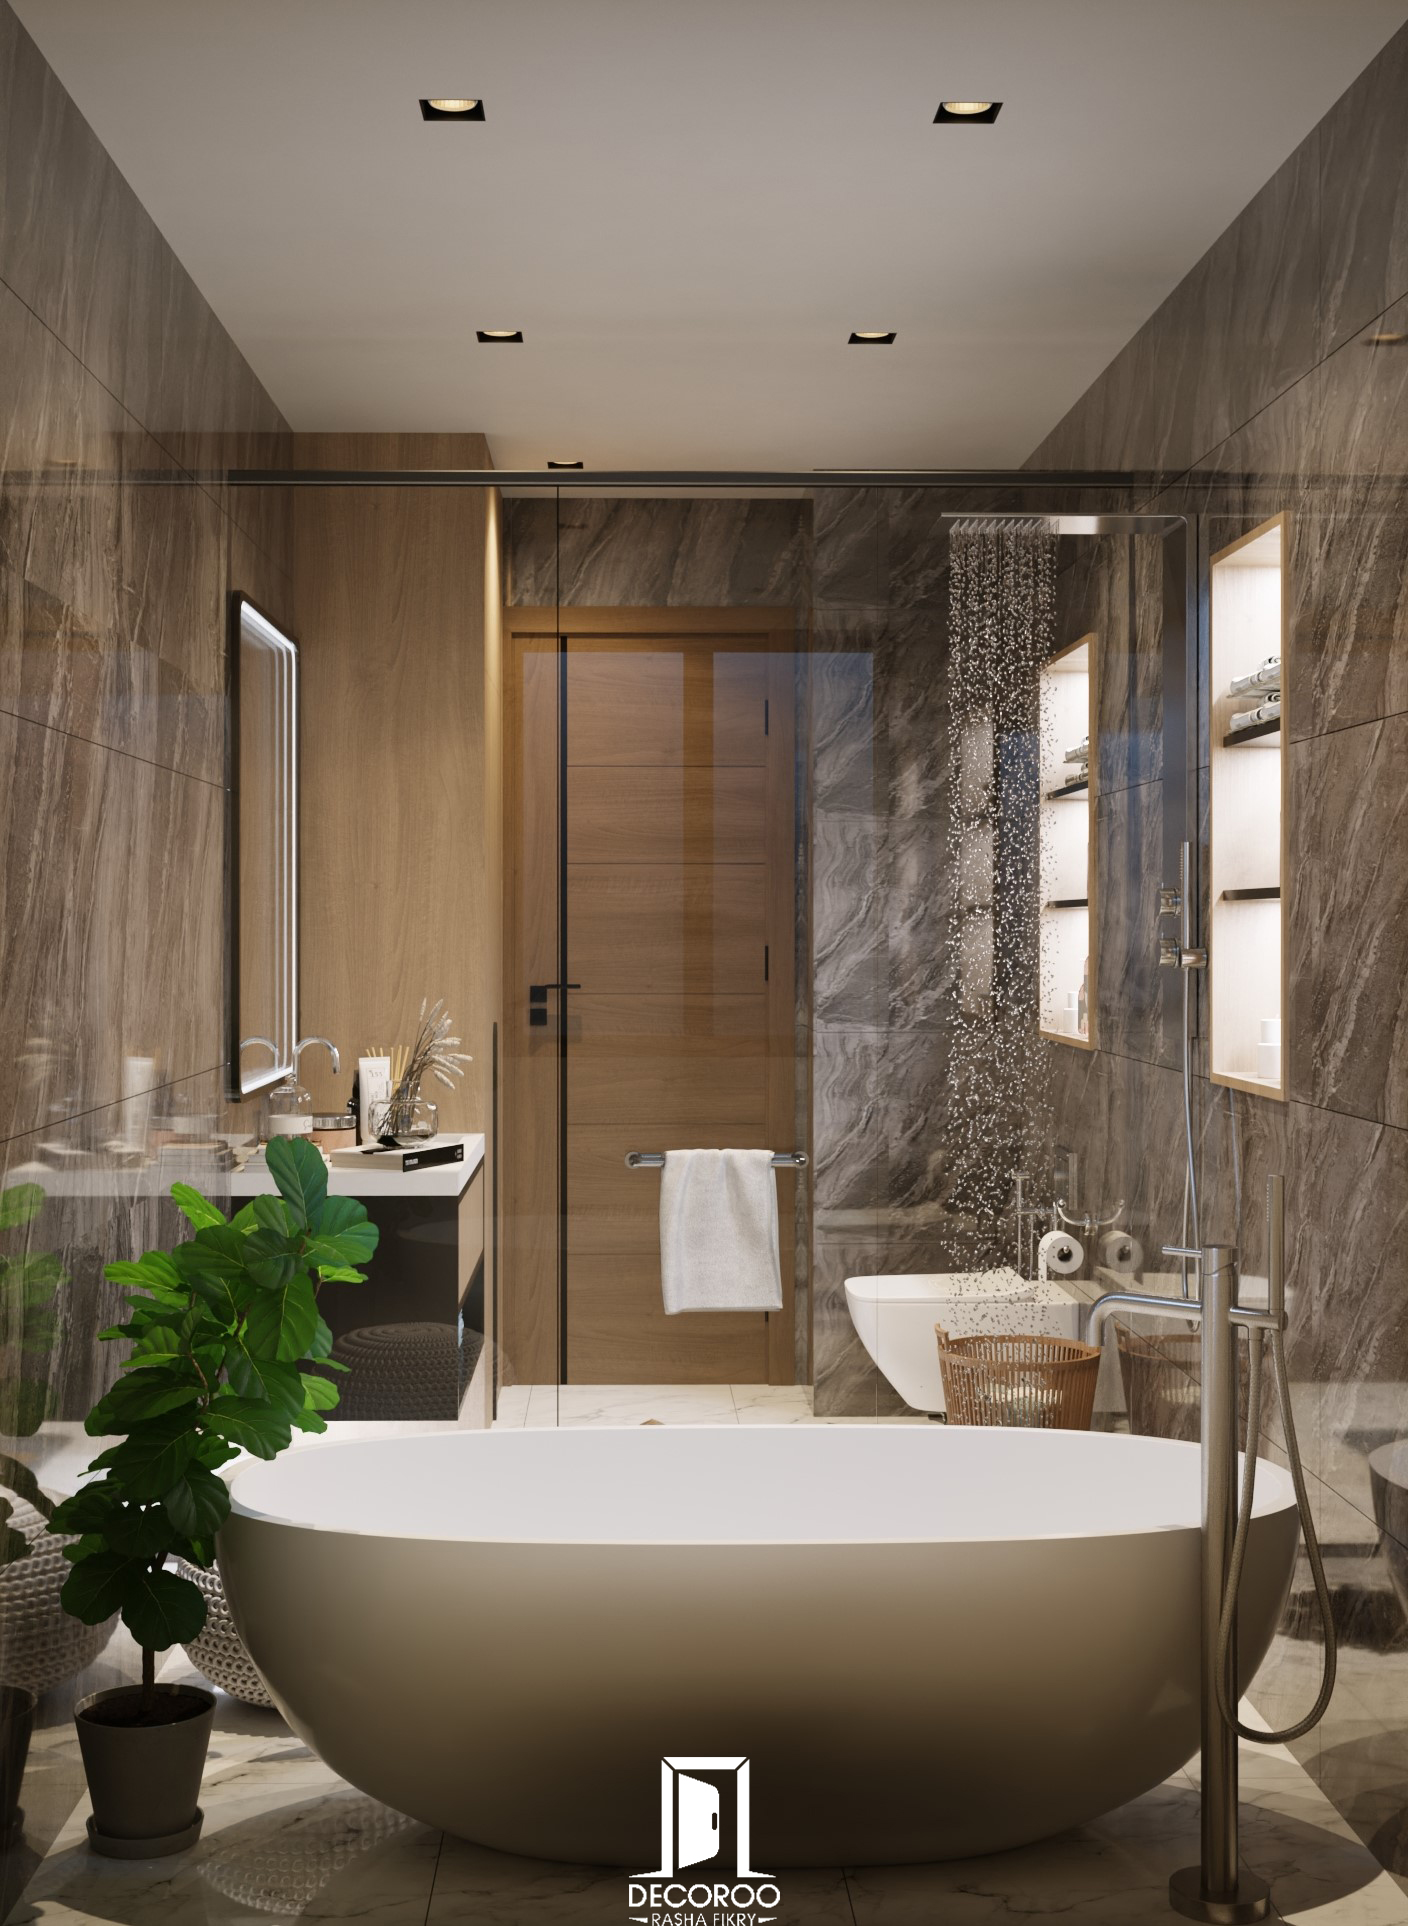 The latest bathroom designs for the new year